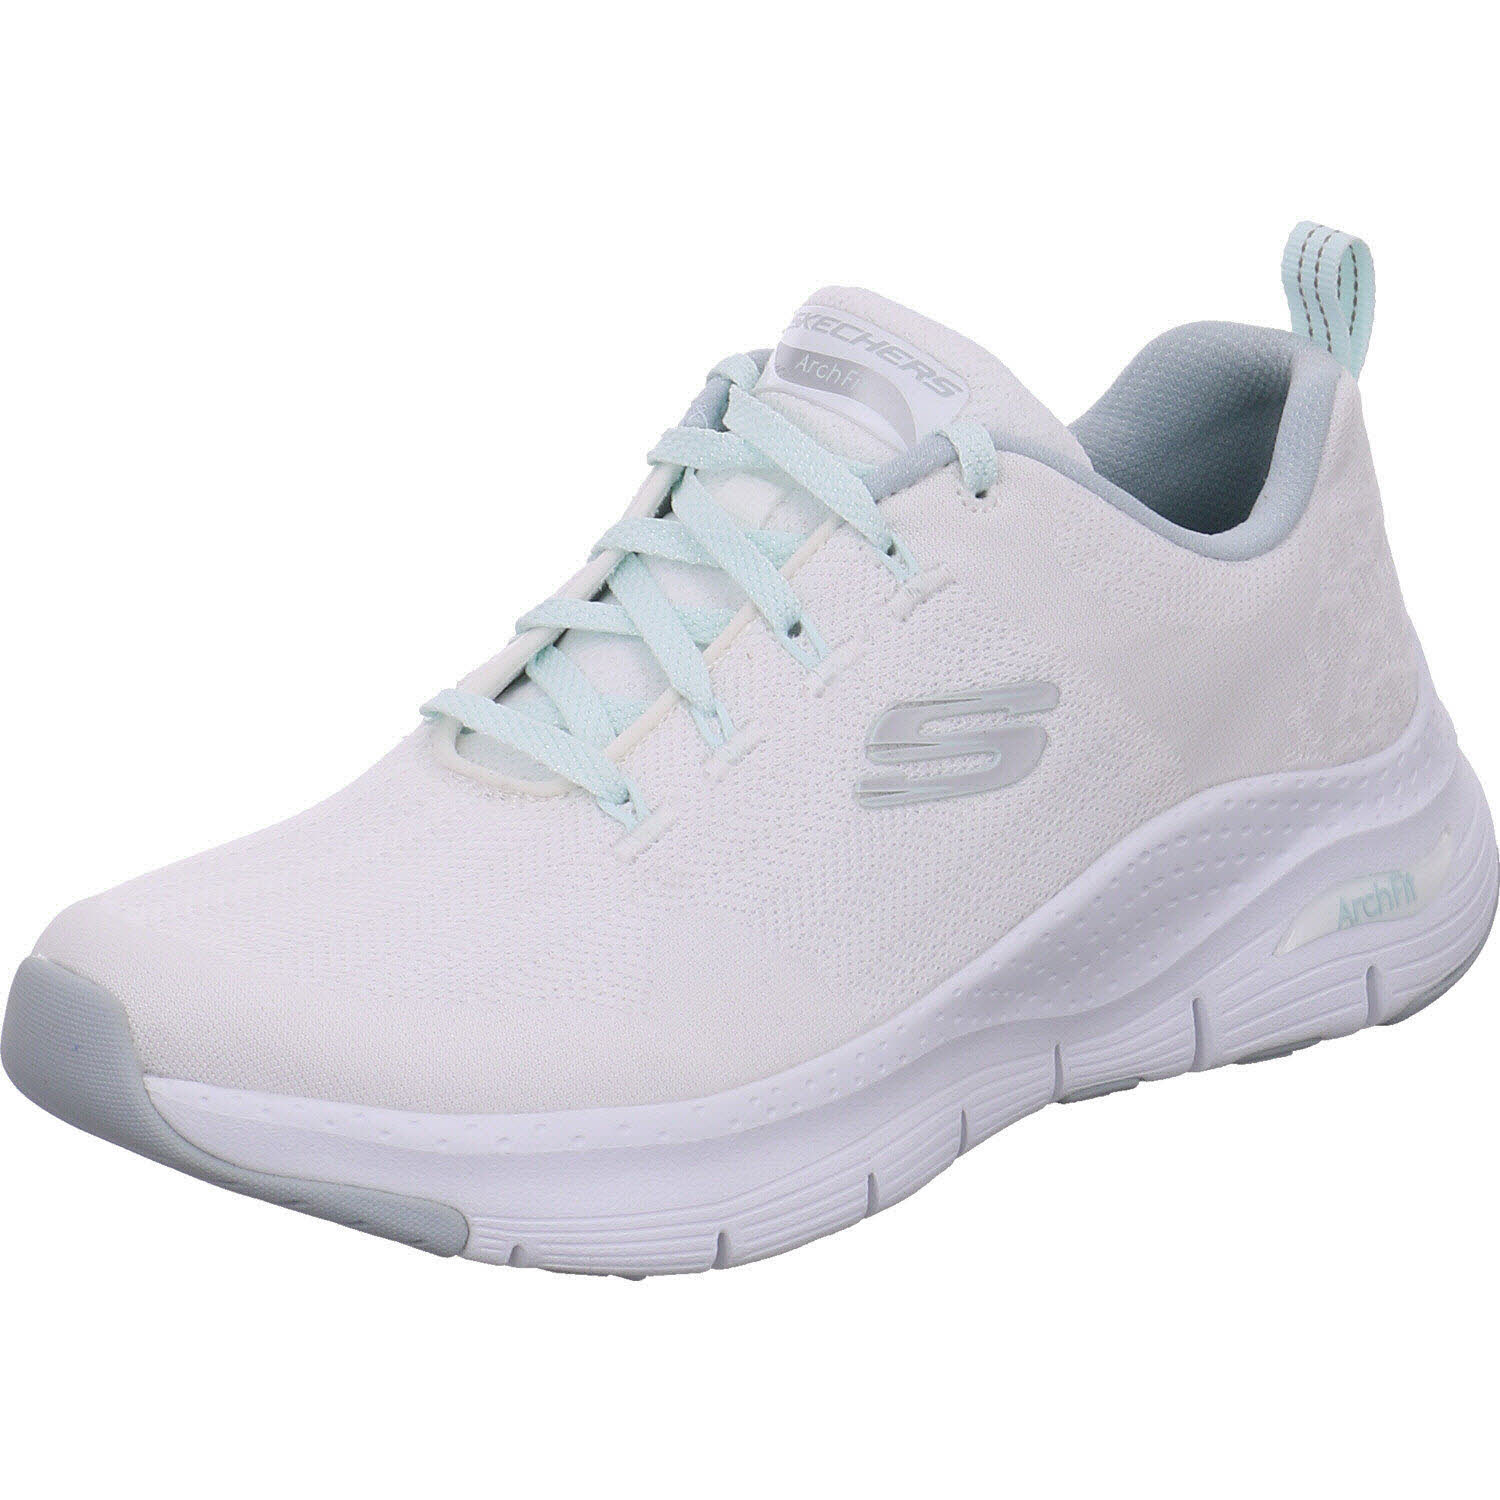 Skechers Sneaker low Arch  Fit - Comfy Wave